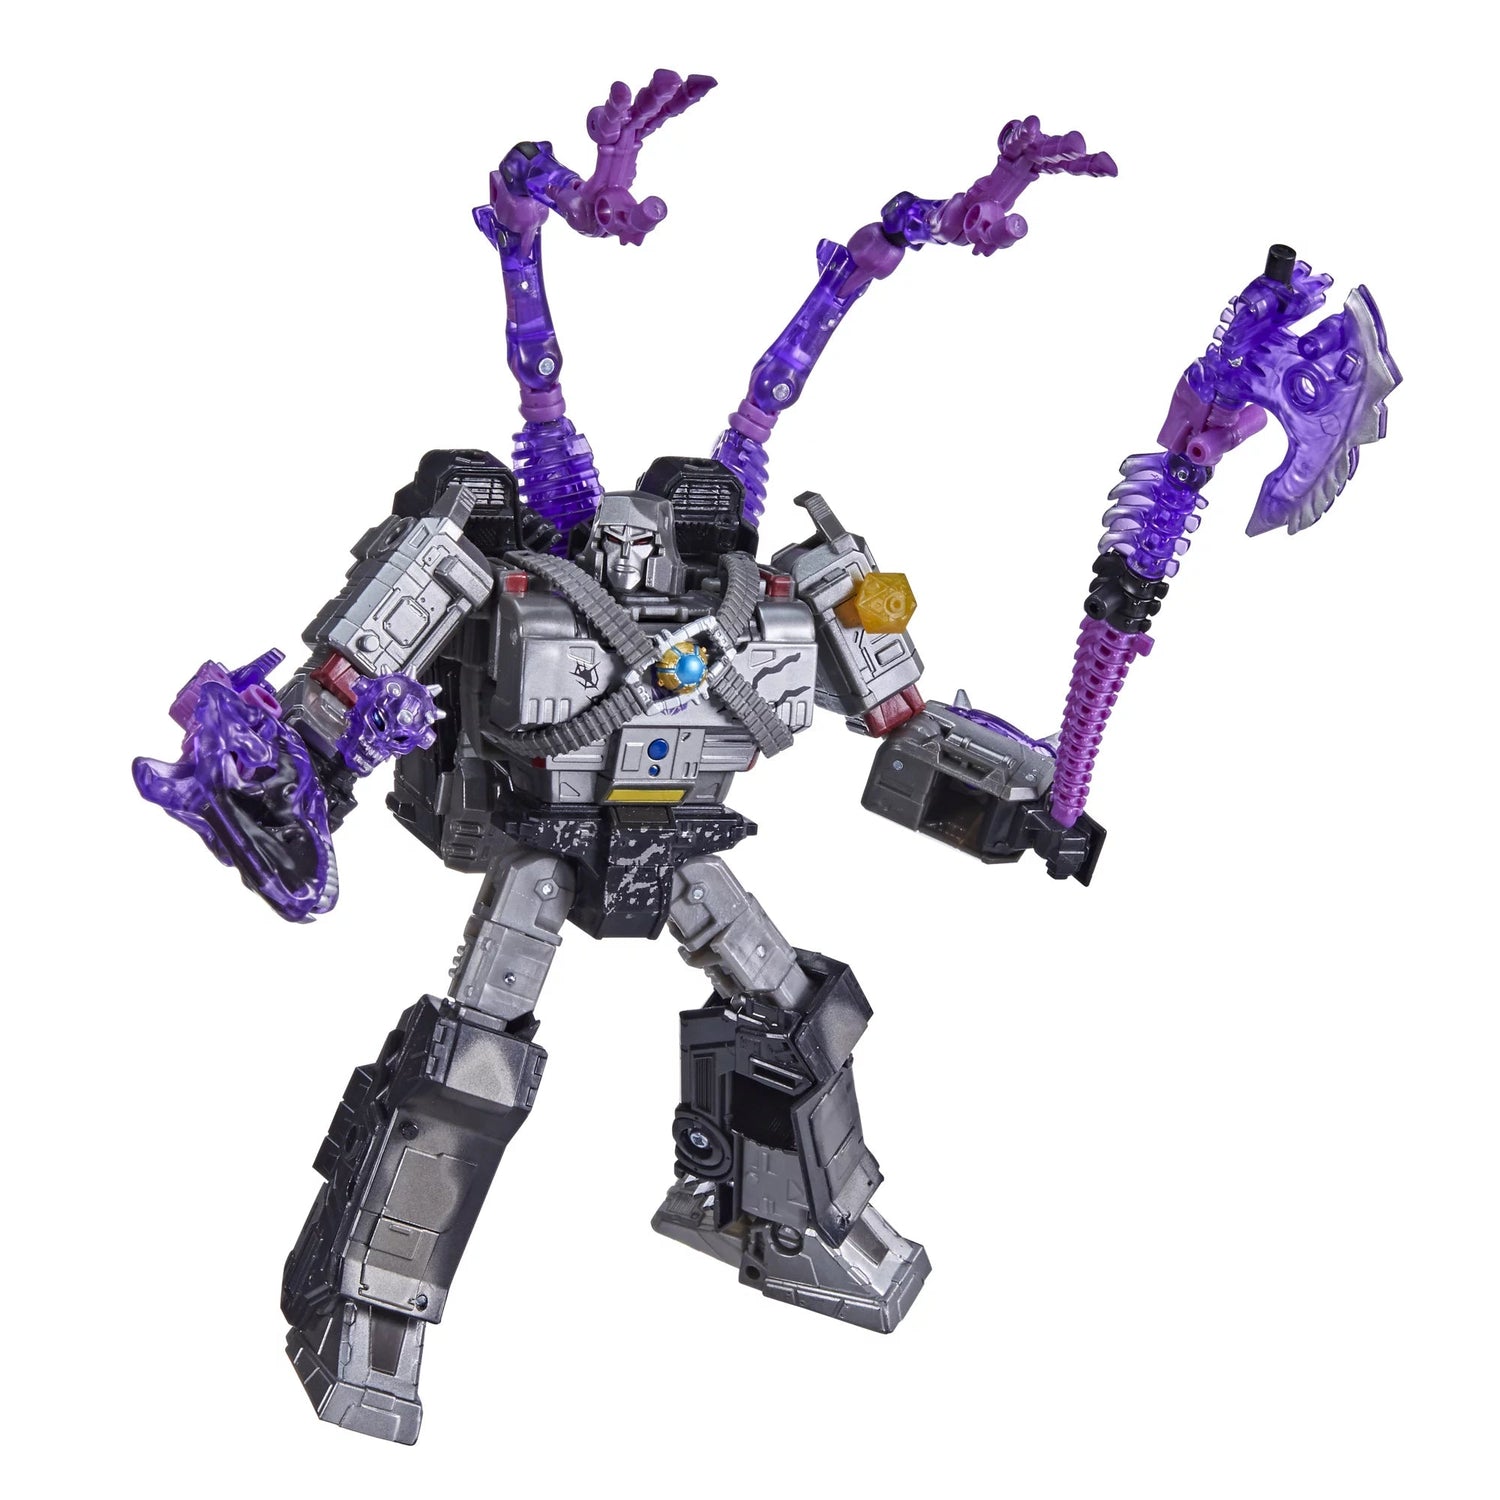 Transformers Toys Generations War for Cybertron Series-Inspired Leader Class Spoiler Pack Hasbro